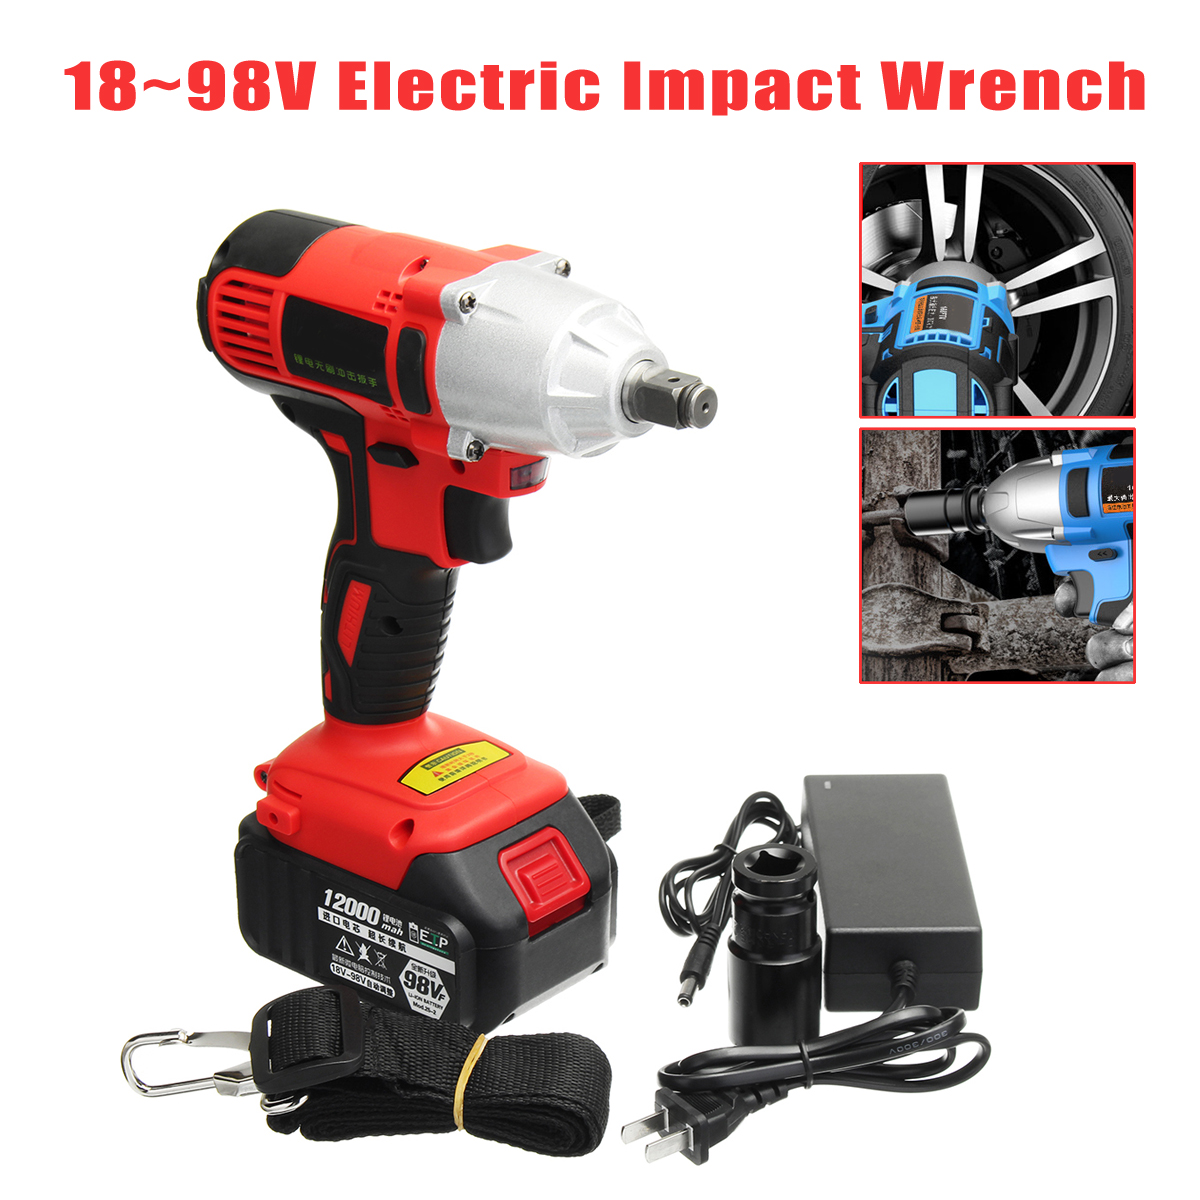 Electric-Wrench-98V-Lithium-Ion-Cordless-Impact-Wrench-Brushless-Motor-Power-Wrench-Tools-1310565-2